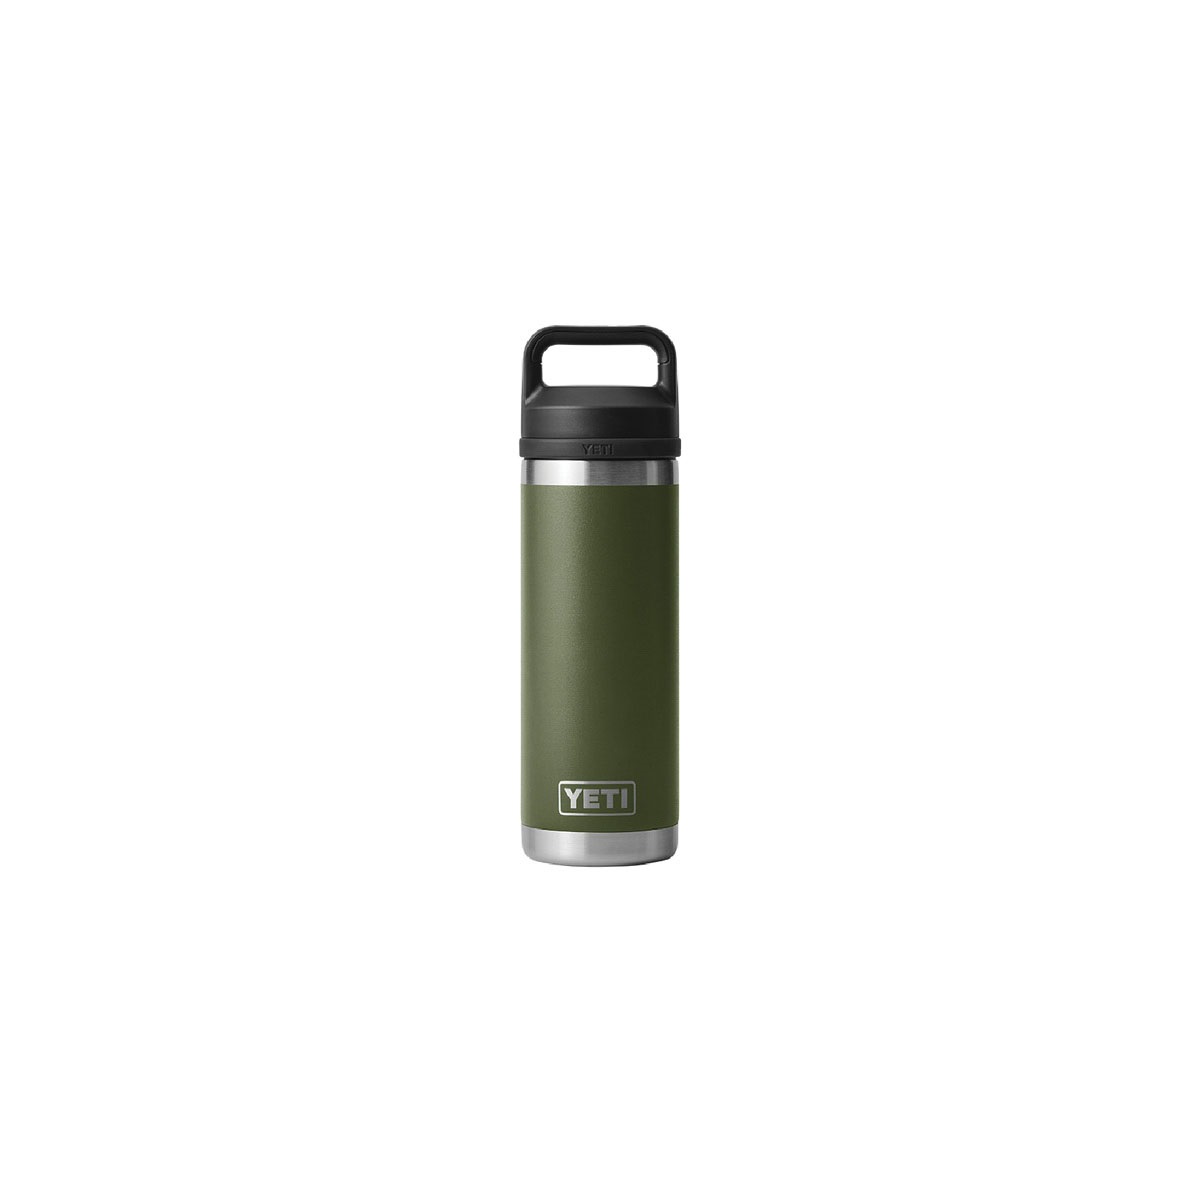 YETI Bottle 26 oz Canopy Green with Chugg Cap. Brand New!